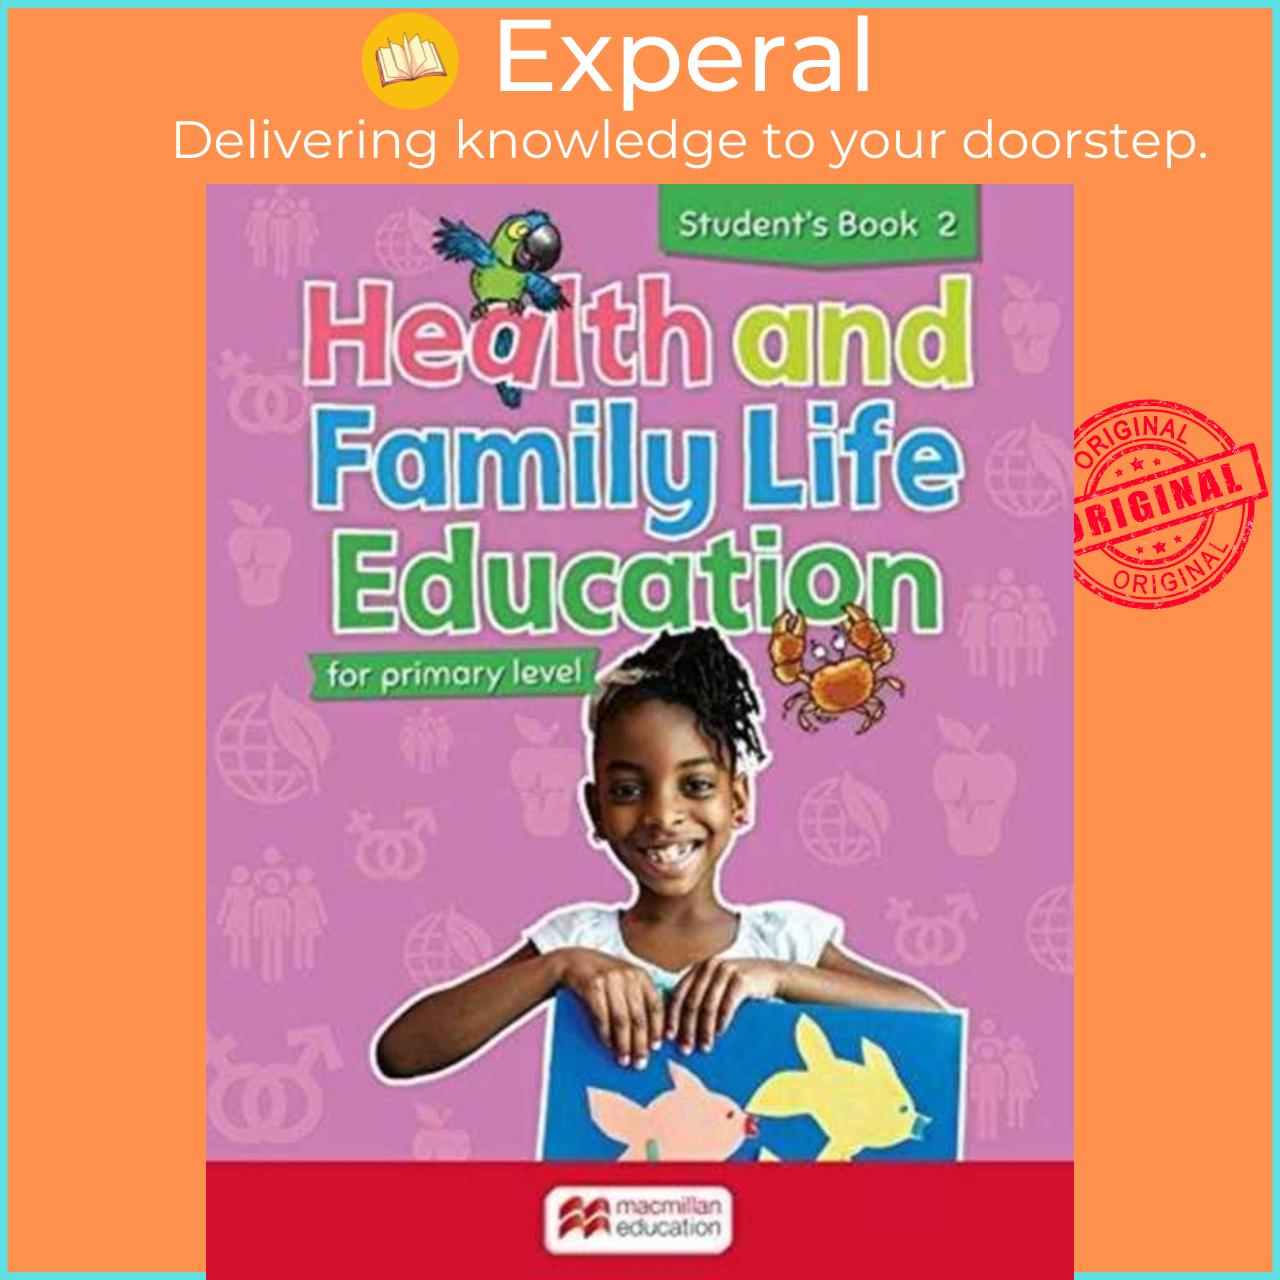 Sách - Health and Family Life Education Student's Book 2 - for primary level by Clare Eastland (UK edition, paperback)